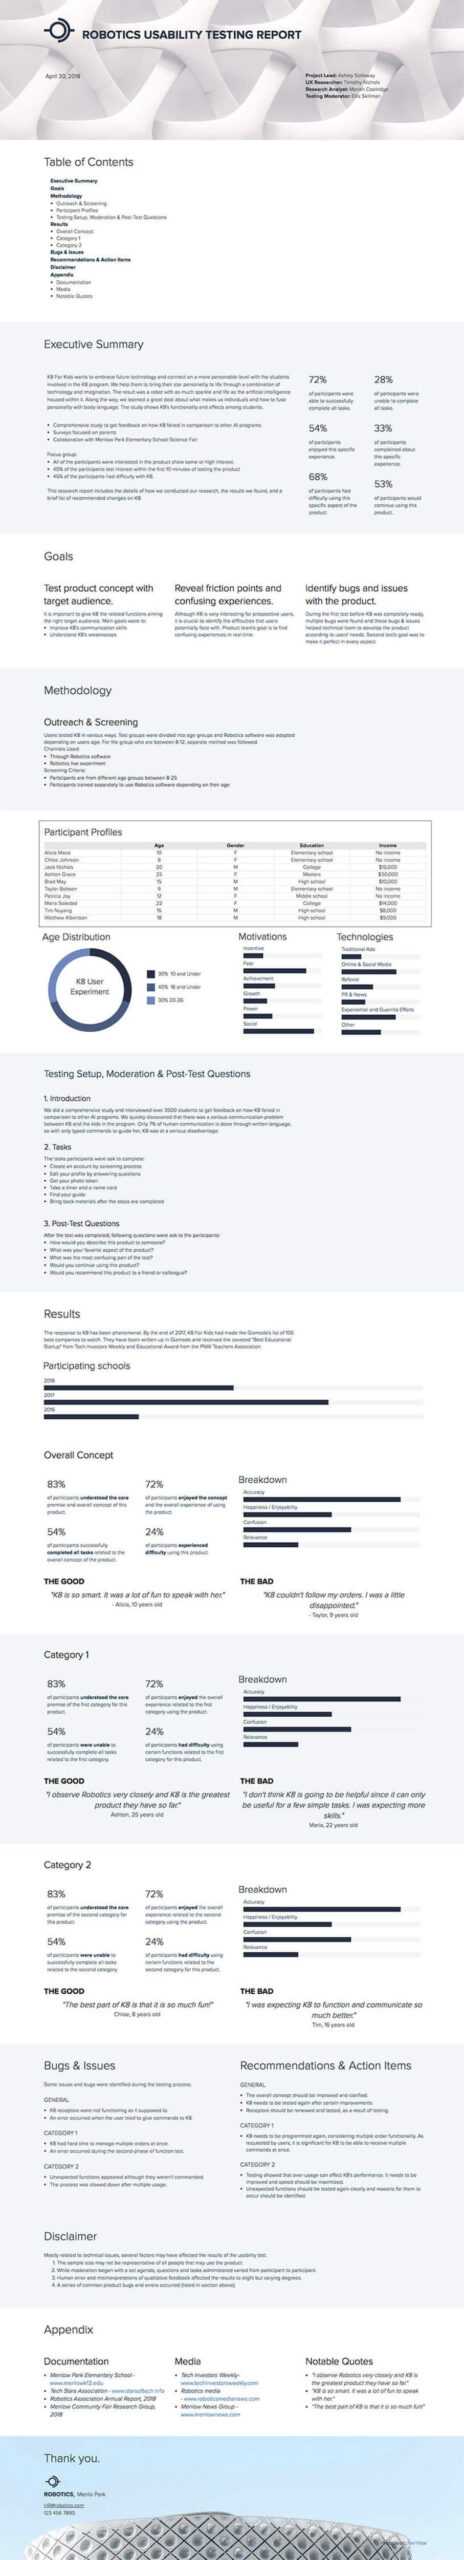 How To Write A Usability Testing Report (With Samples) | Xtensio Within Ux Report Template